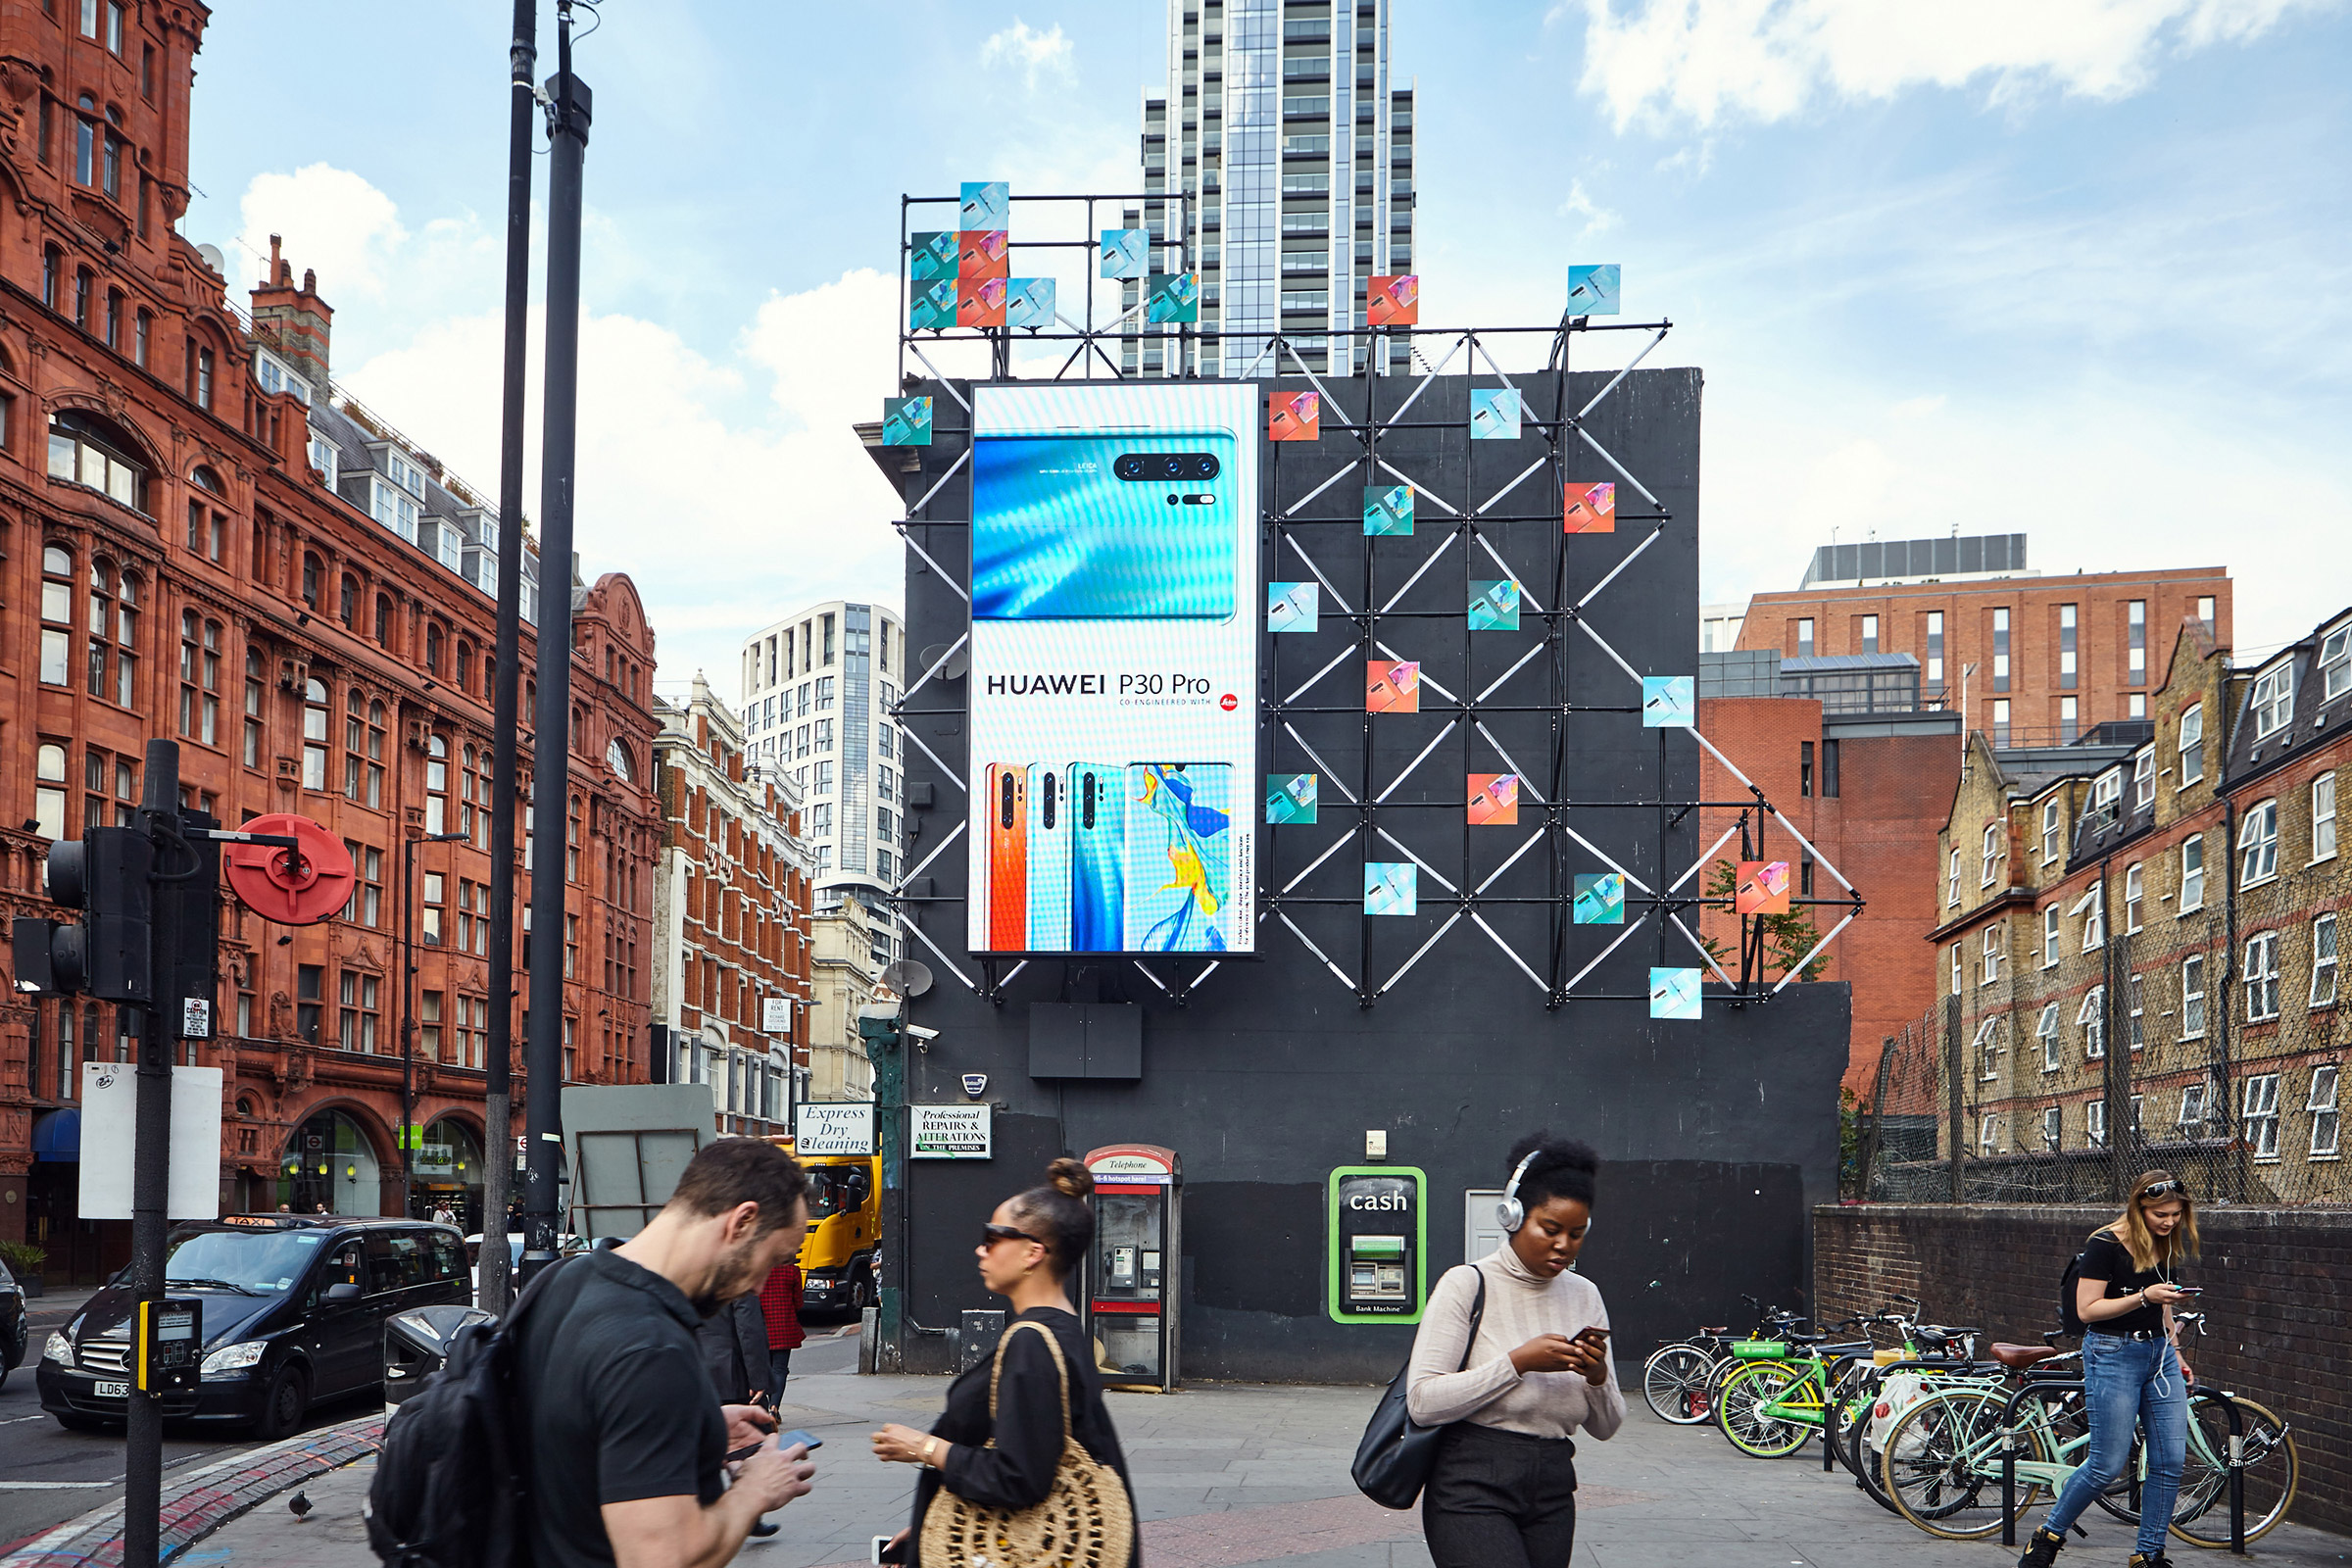 A Huawei advertisement on a billboard in London, May, 23, 2019. (Suzie Howell—The New York Times/Redux)